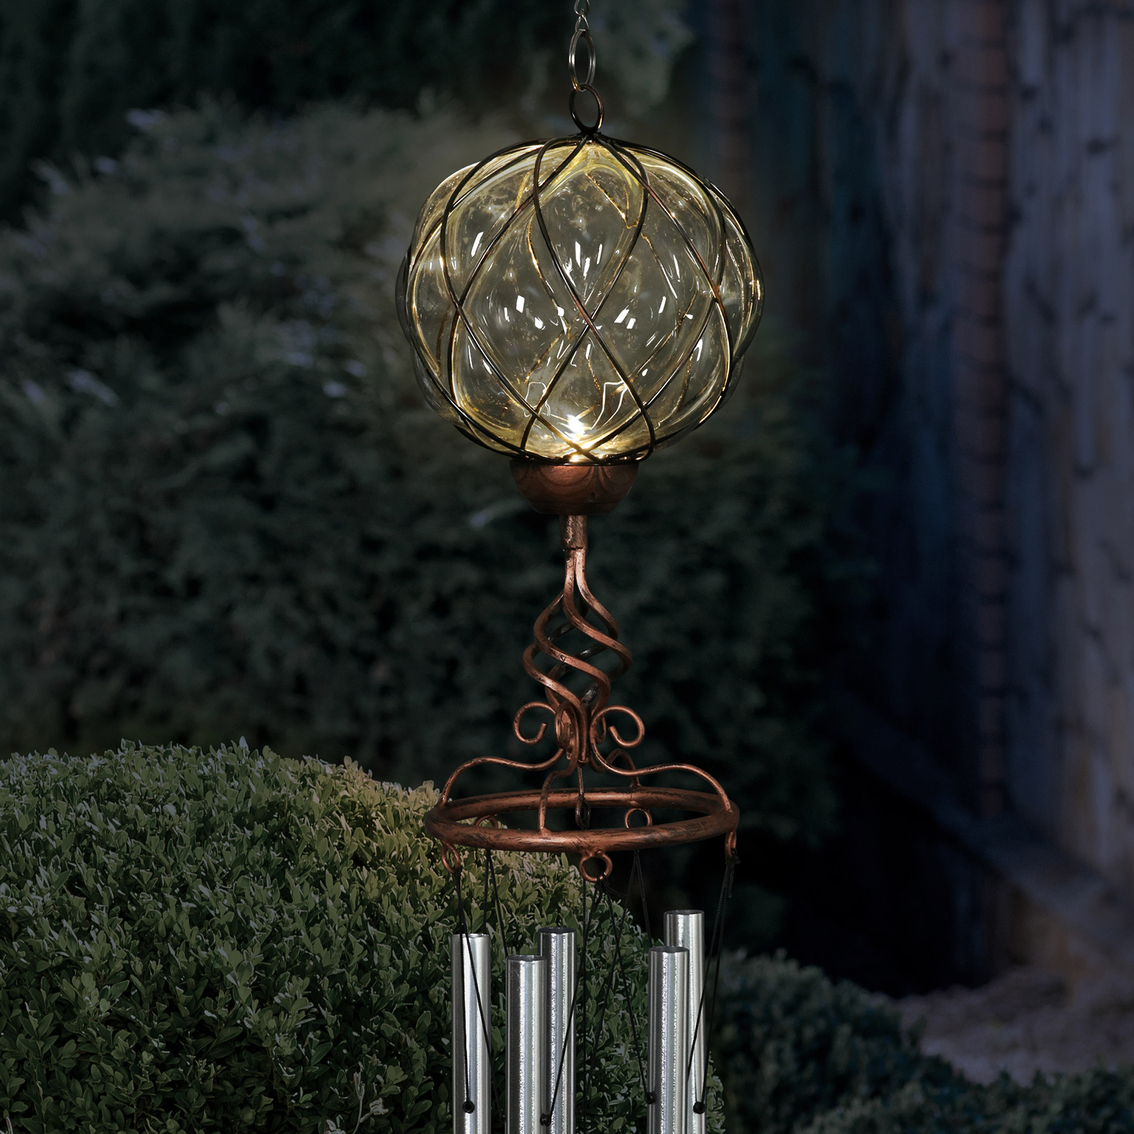 Exhart Solar Caged Wind Chime with Metal Finial - Image 3 of 3